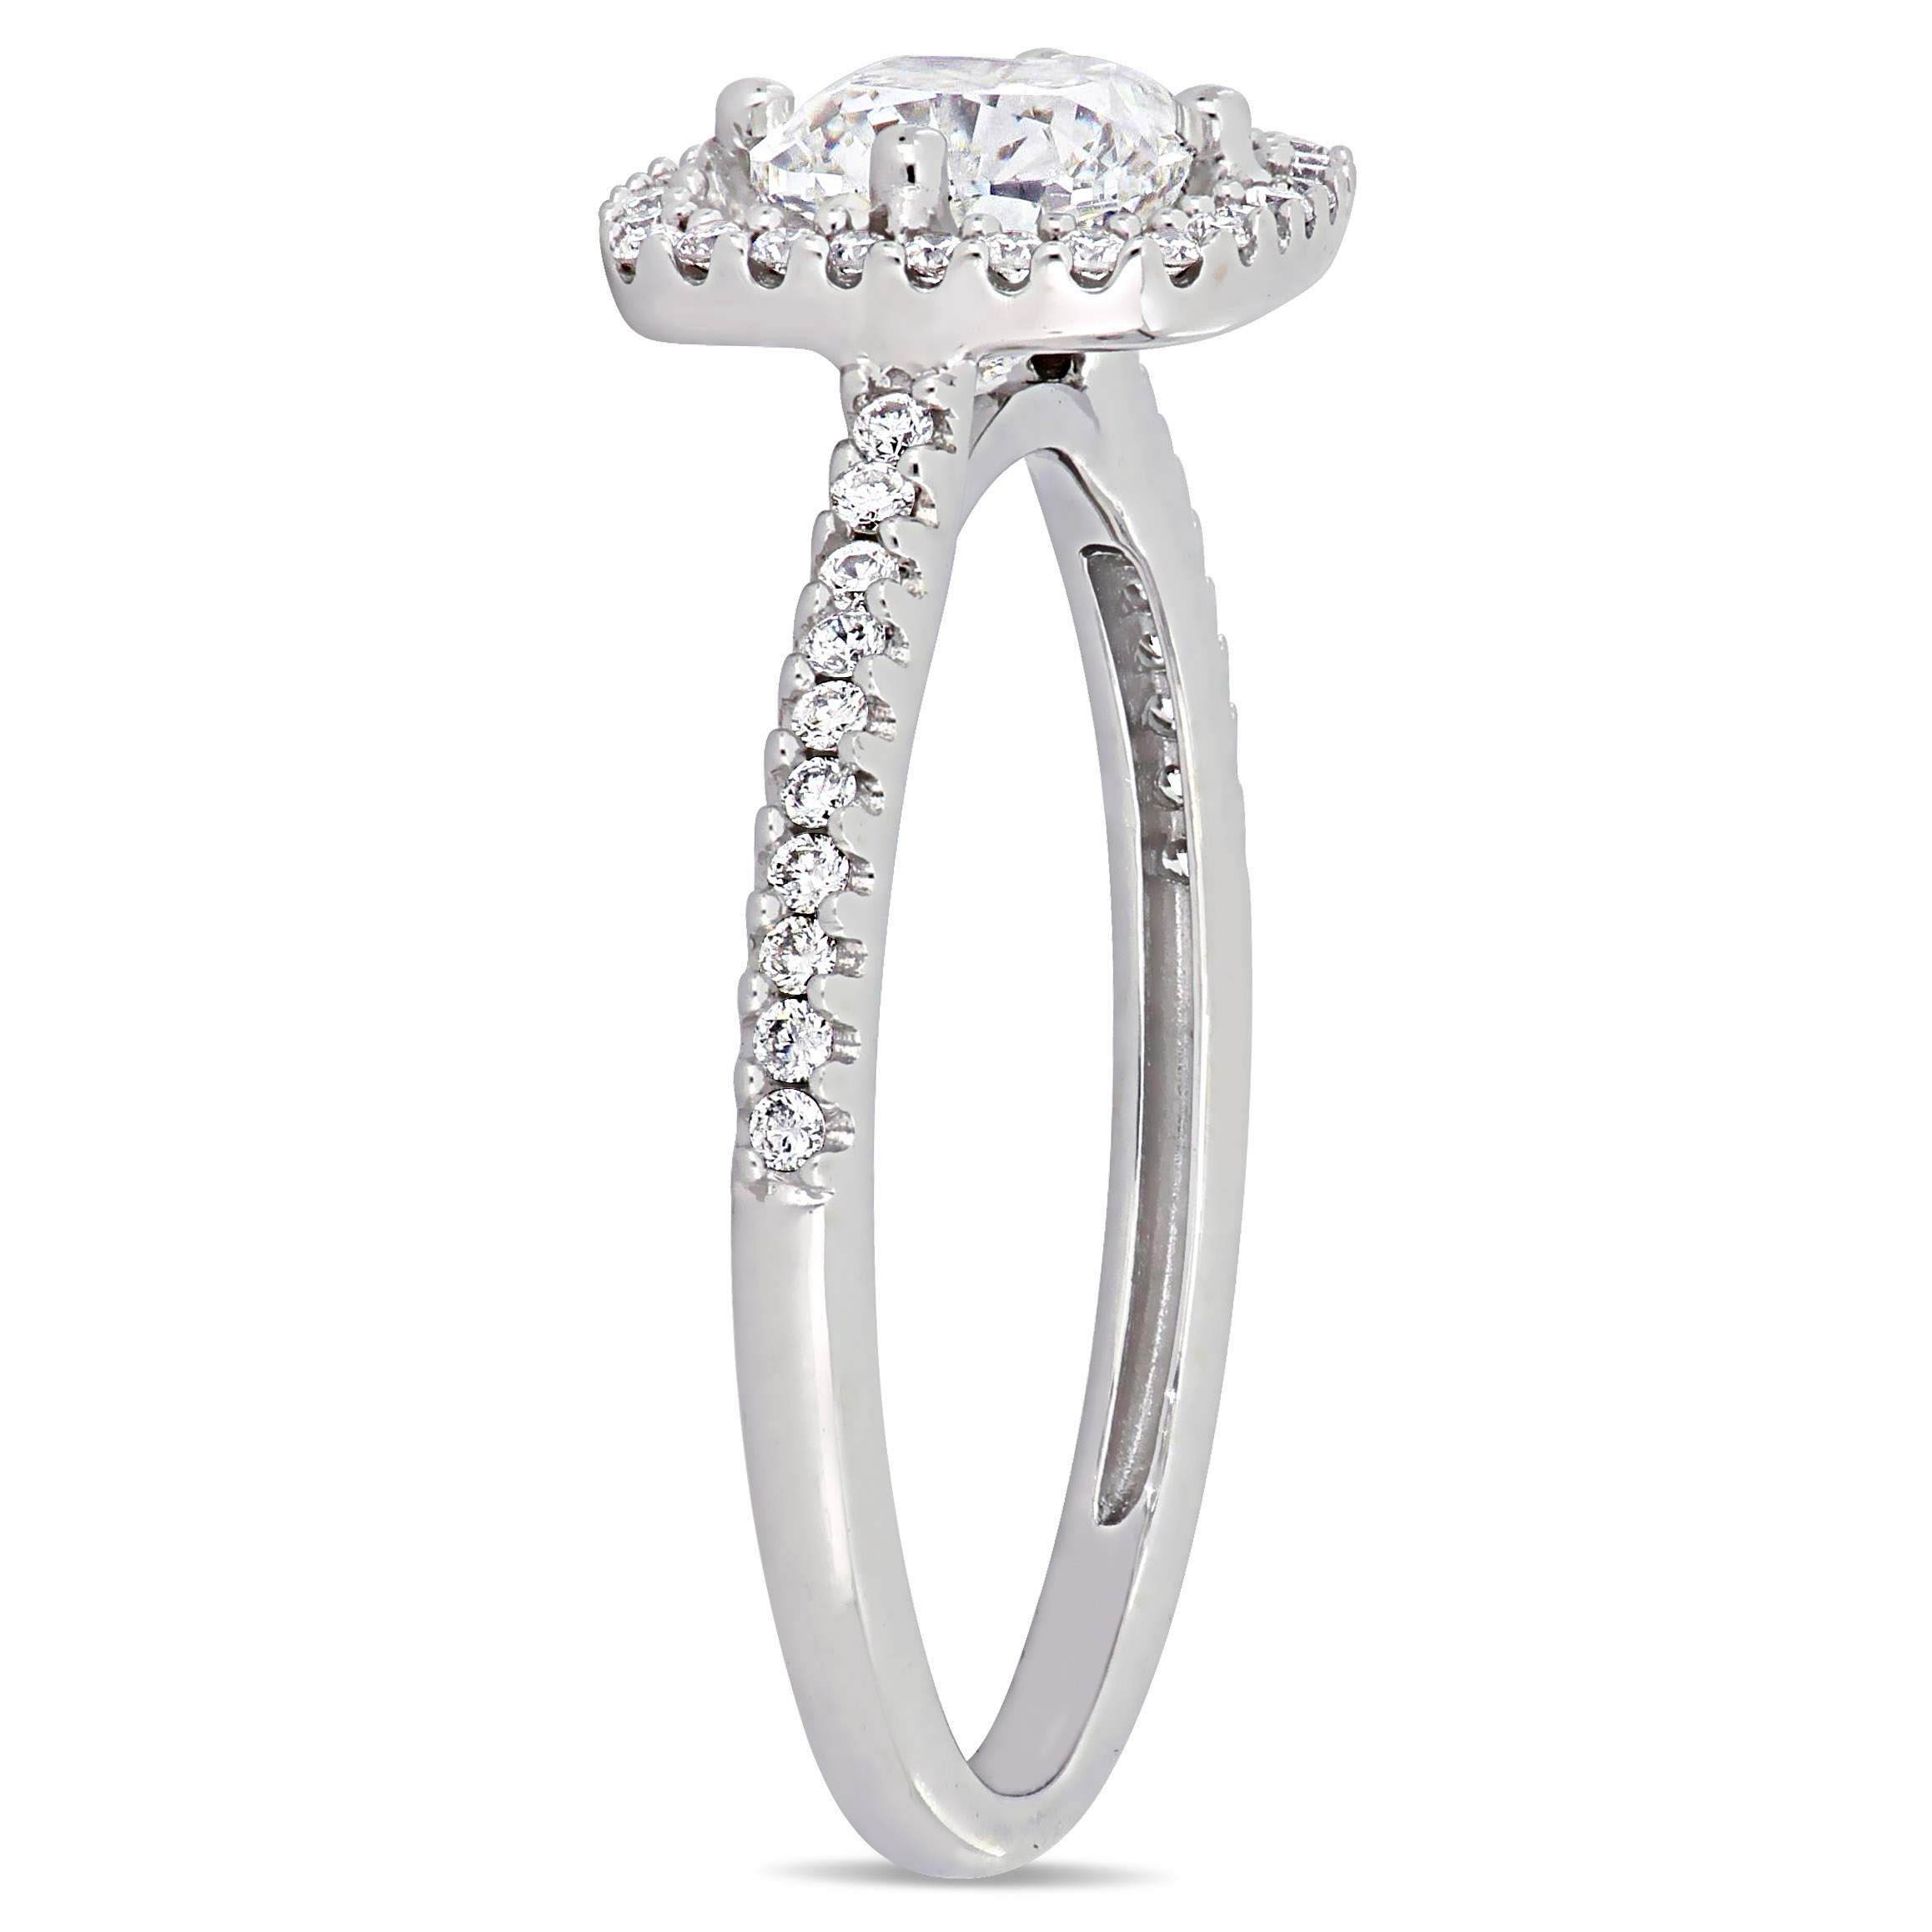 1 1/5 CT TW Cushion-Cut Diamond Floating Halo Engagement Ring in 14k White Gold